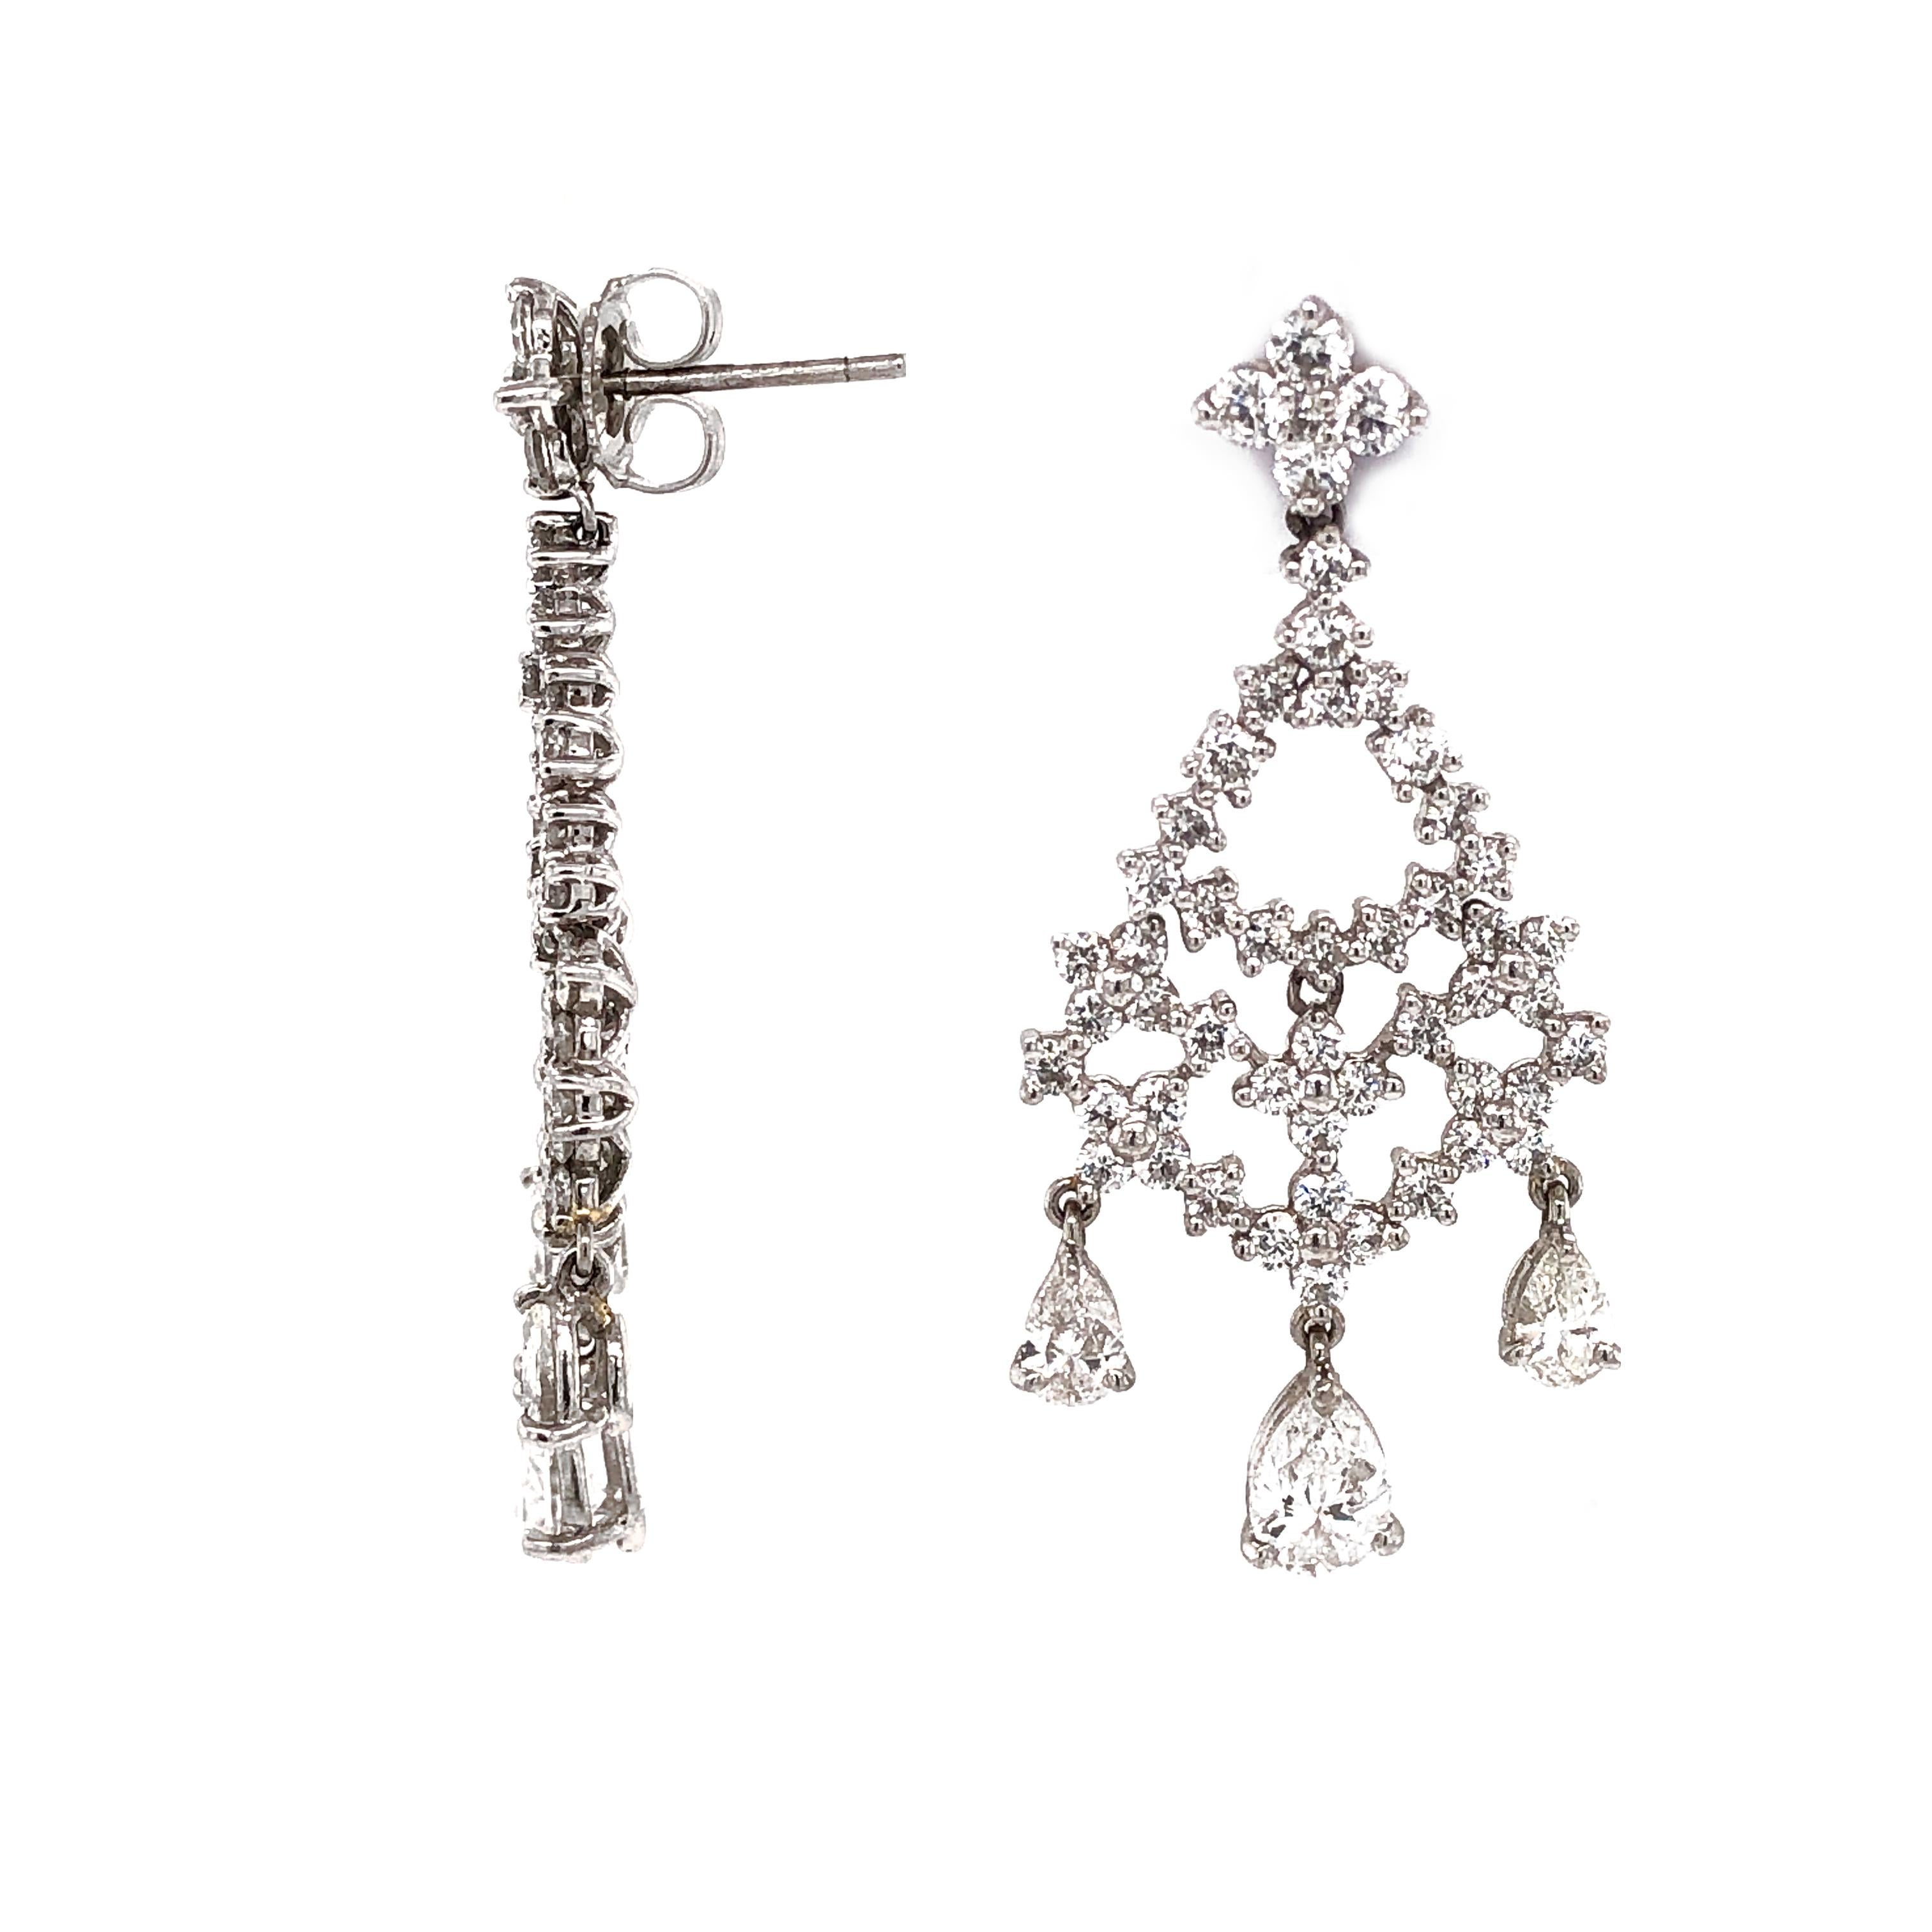 Elegant drop and chandelier mix diamond platinum earrings.
High-light diamond stones in pear cut and accented with smaller round diamonds. 
All diamonds in total are 5.32 carat. 
Diamonds are white and natural and in G-H Color Clarity VS.
Platinum